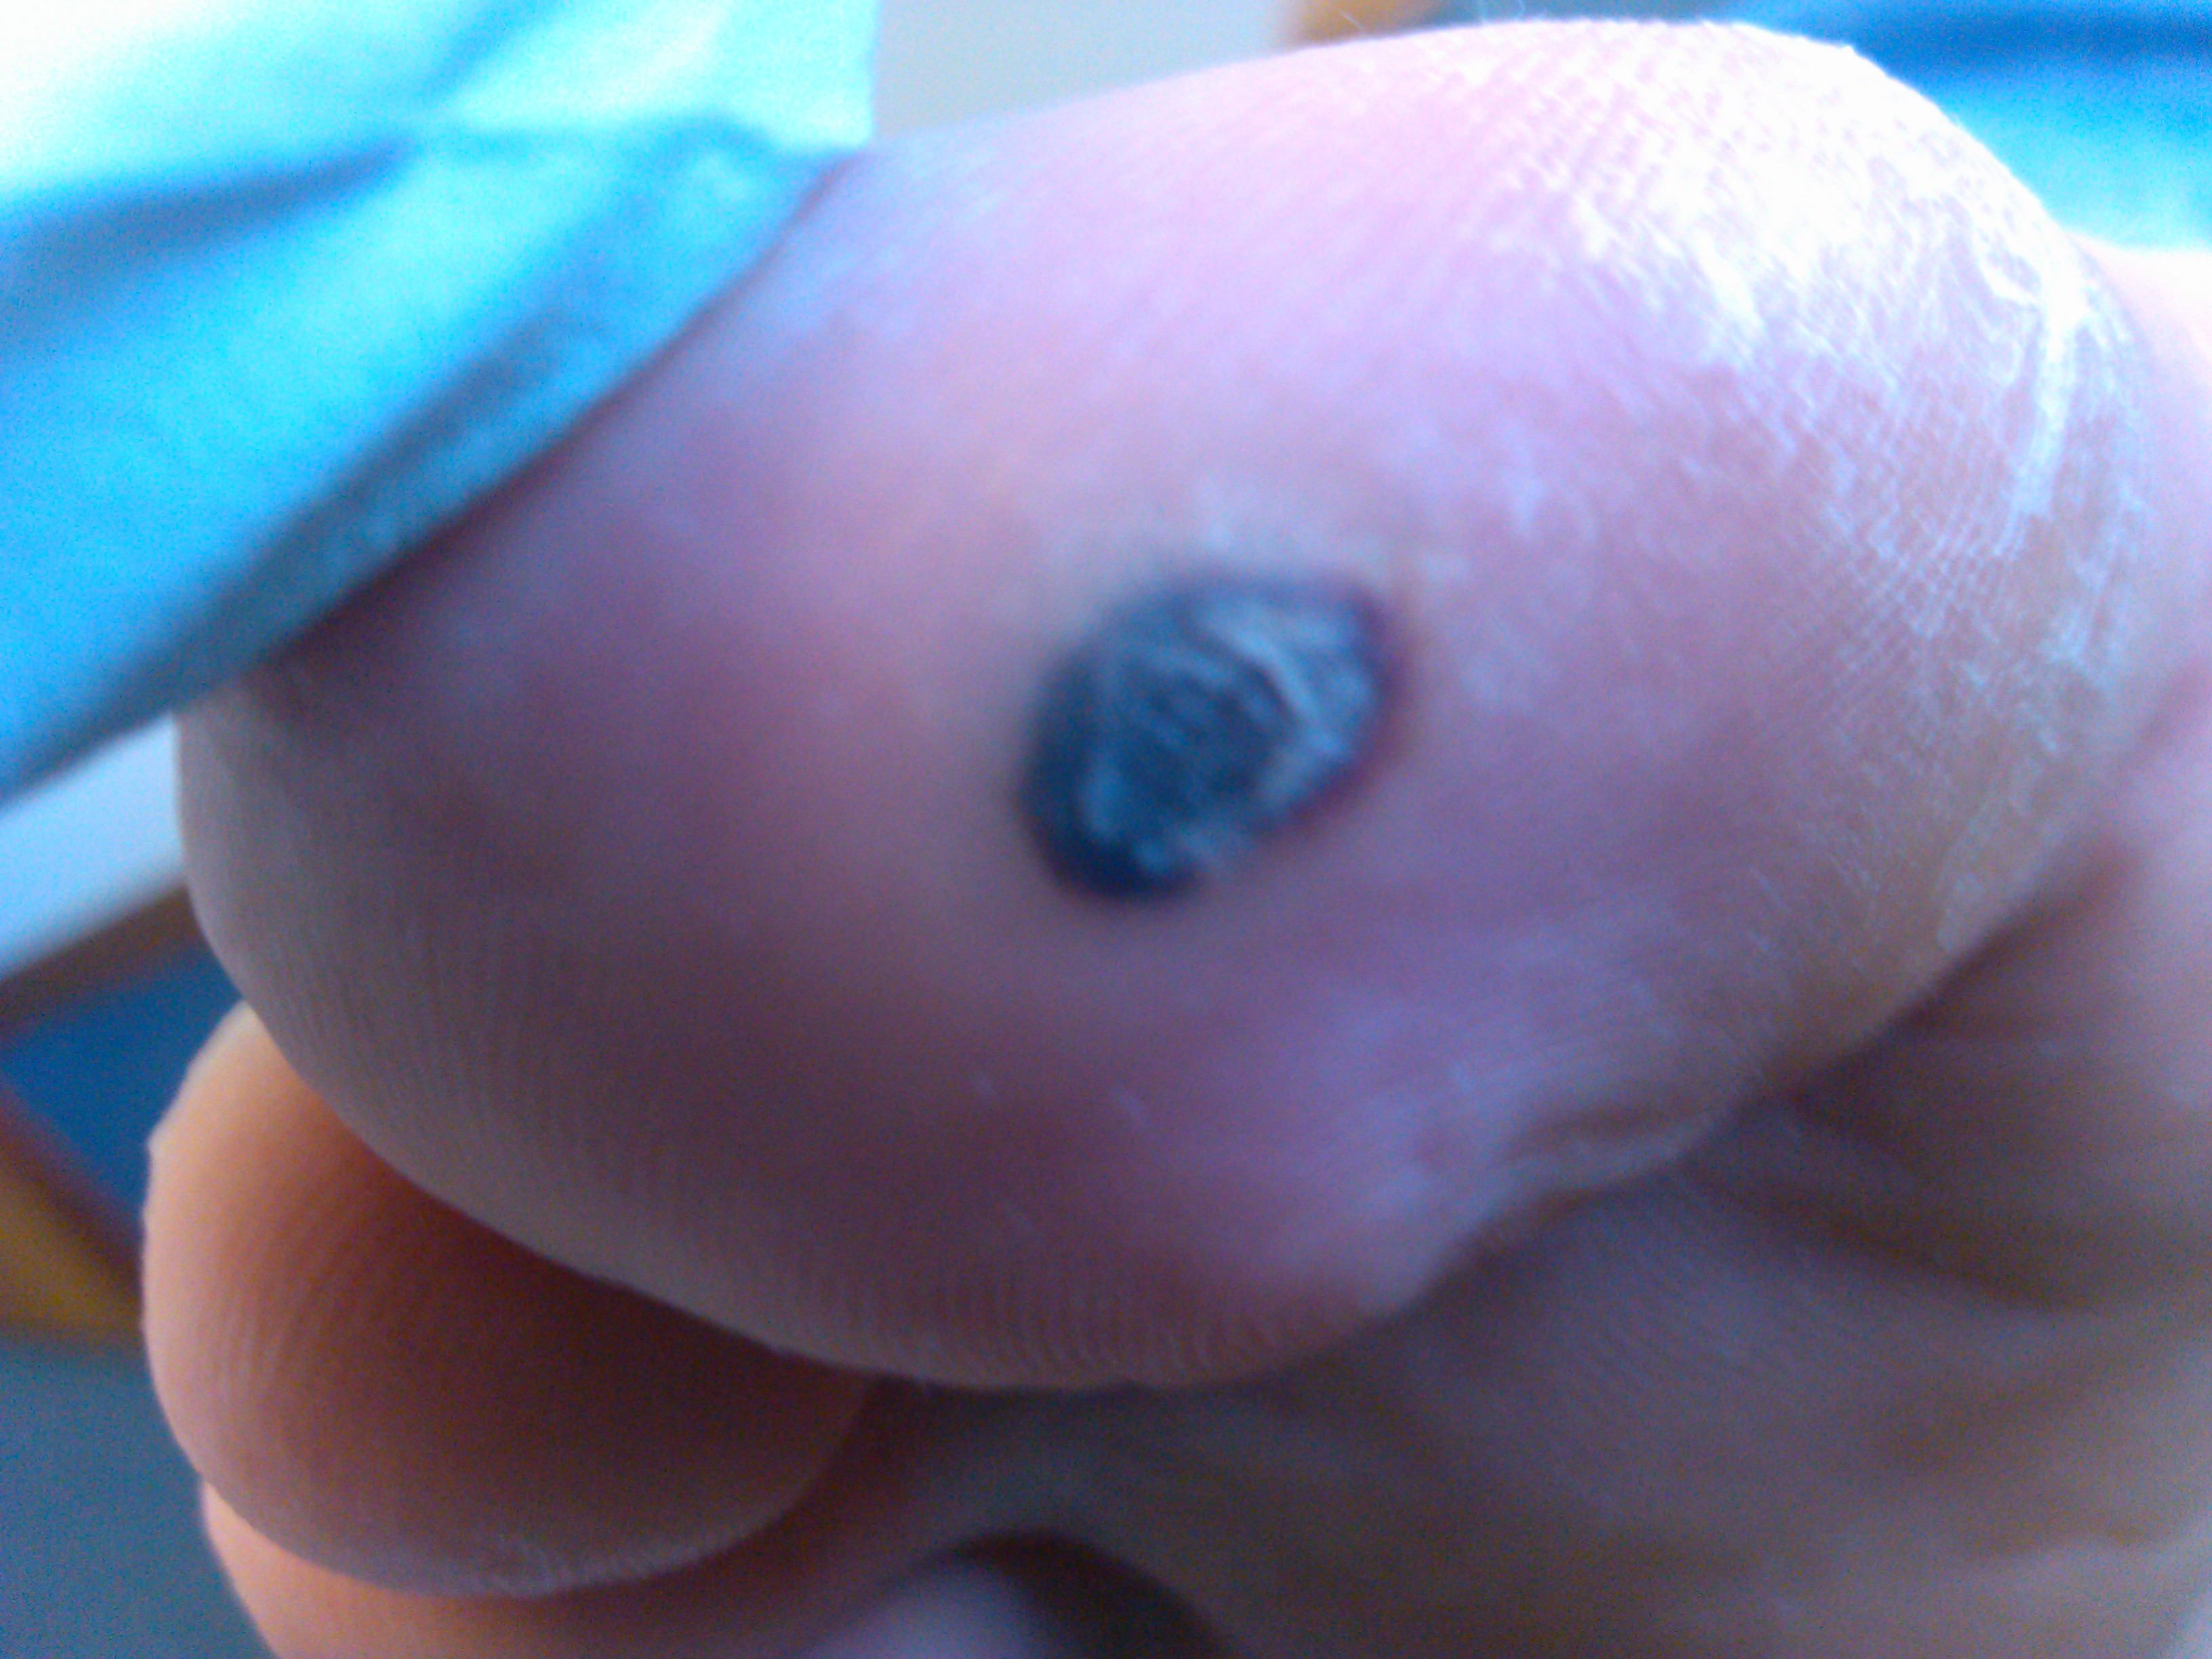 Wart on foot going black, Wart on foot turned black. Wart on foot with black spots - thecroppers.ro